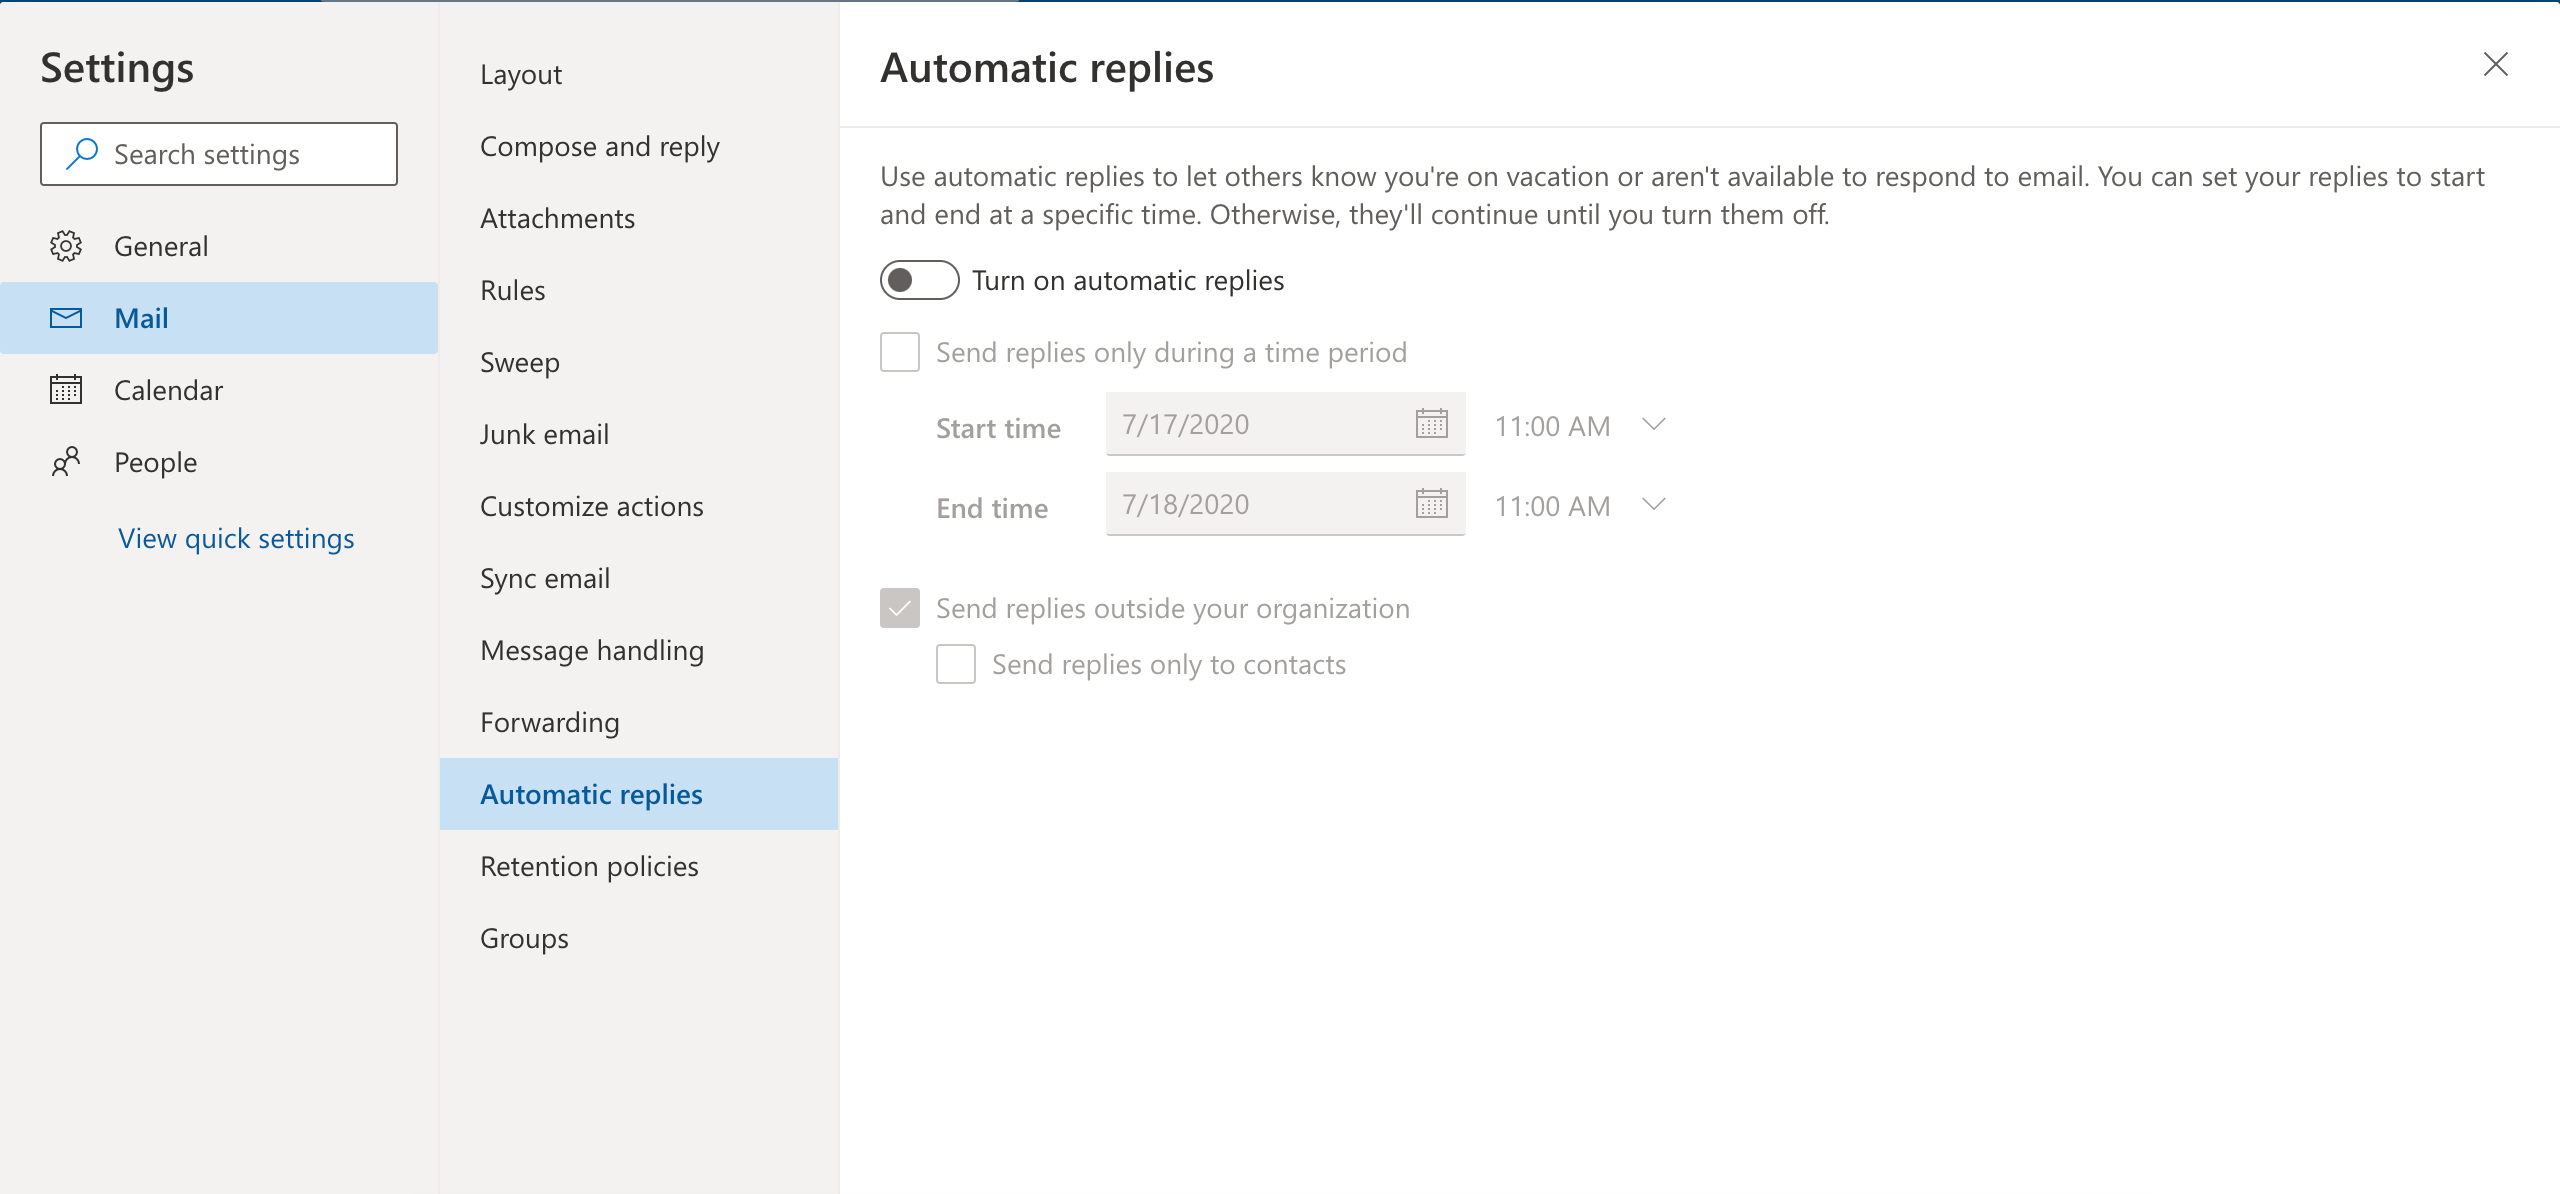 How to set an out of office message in Outlook